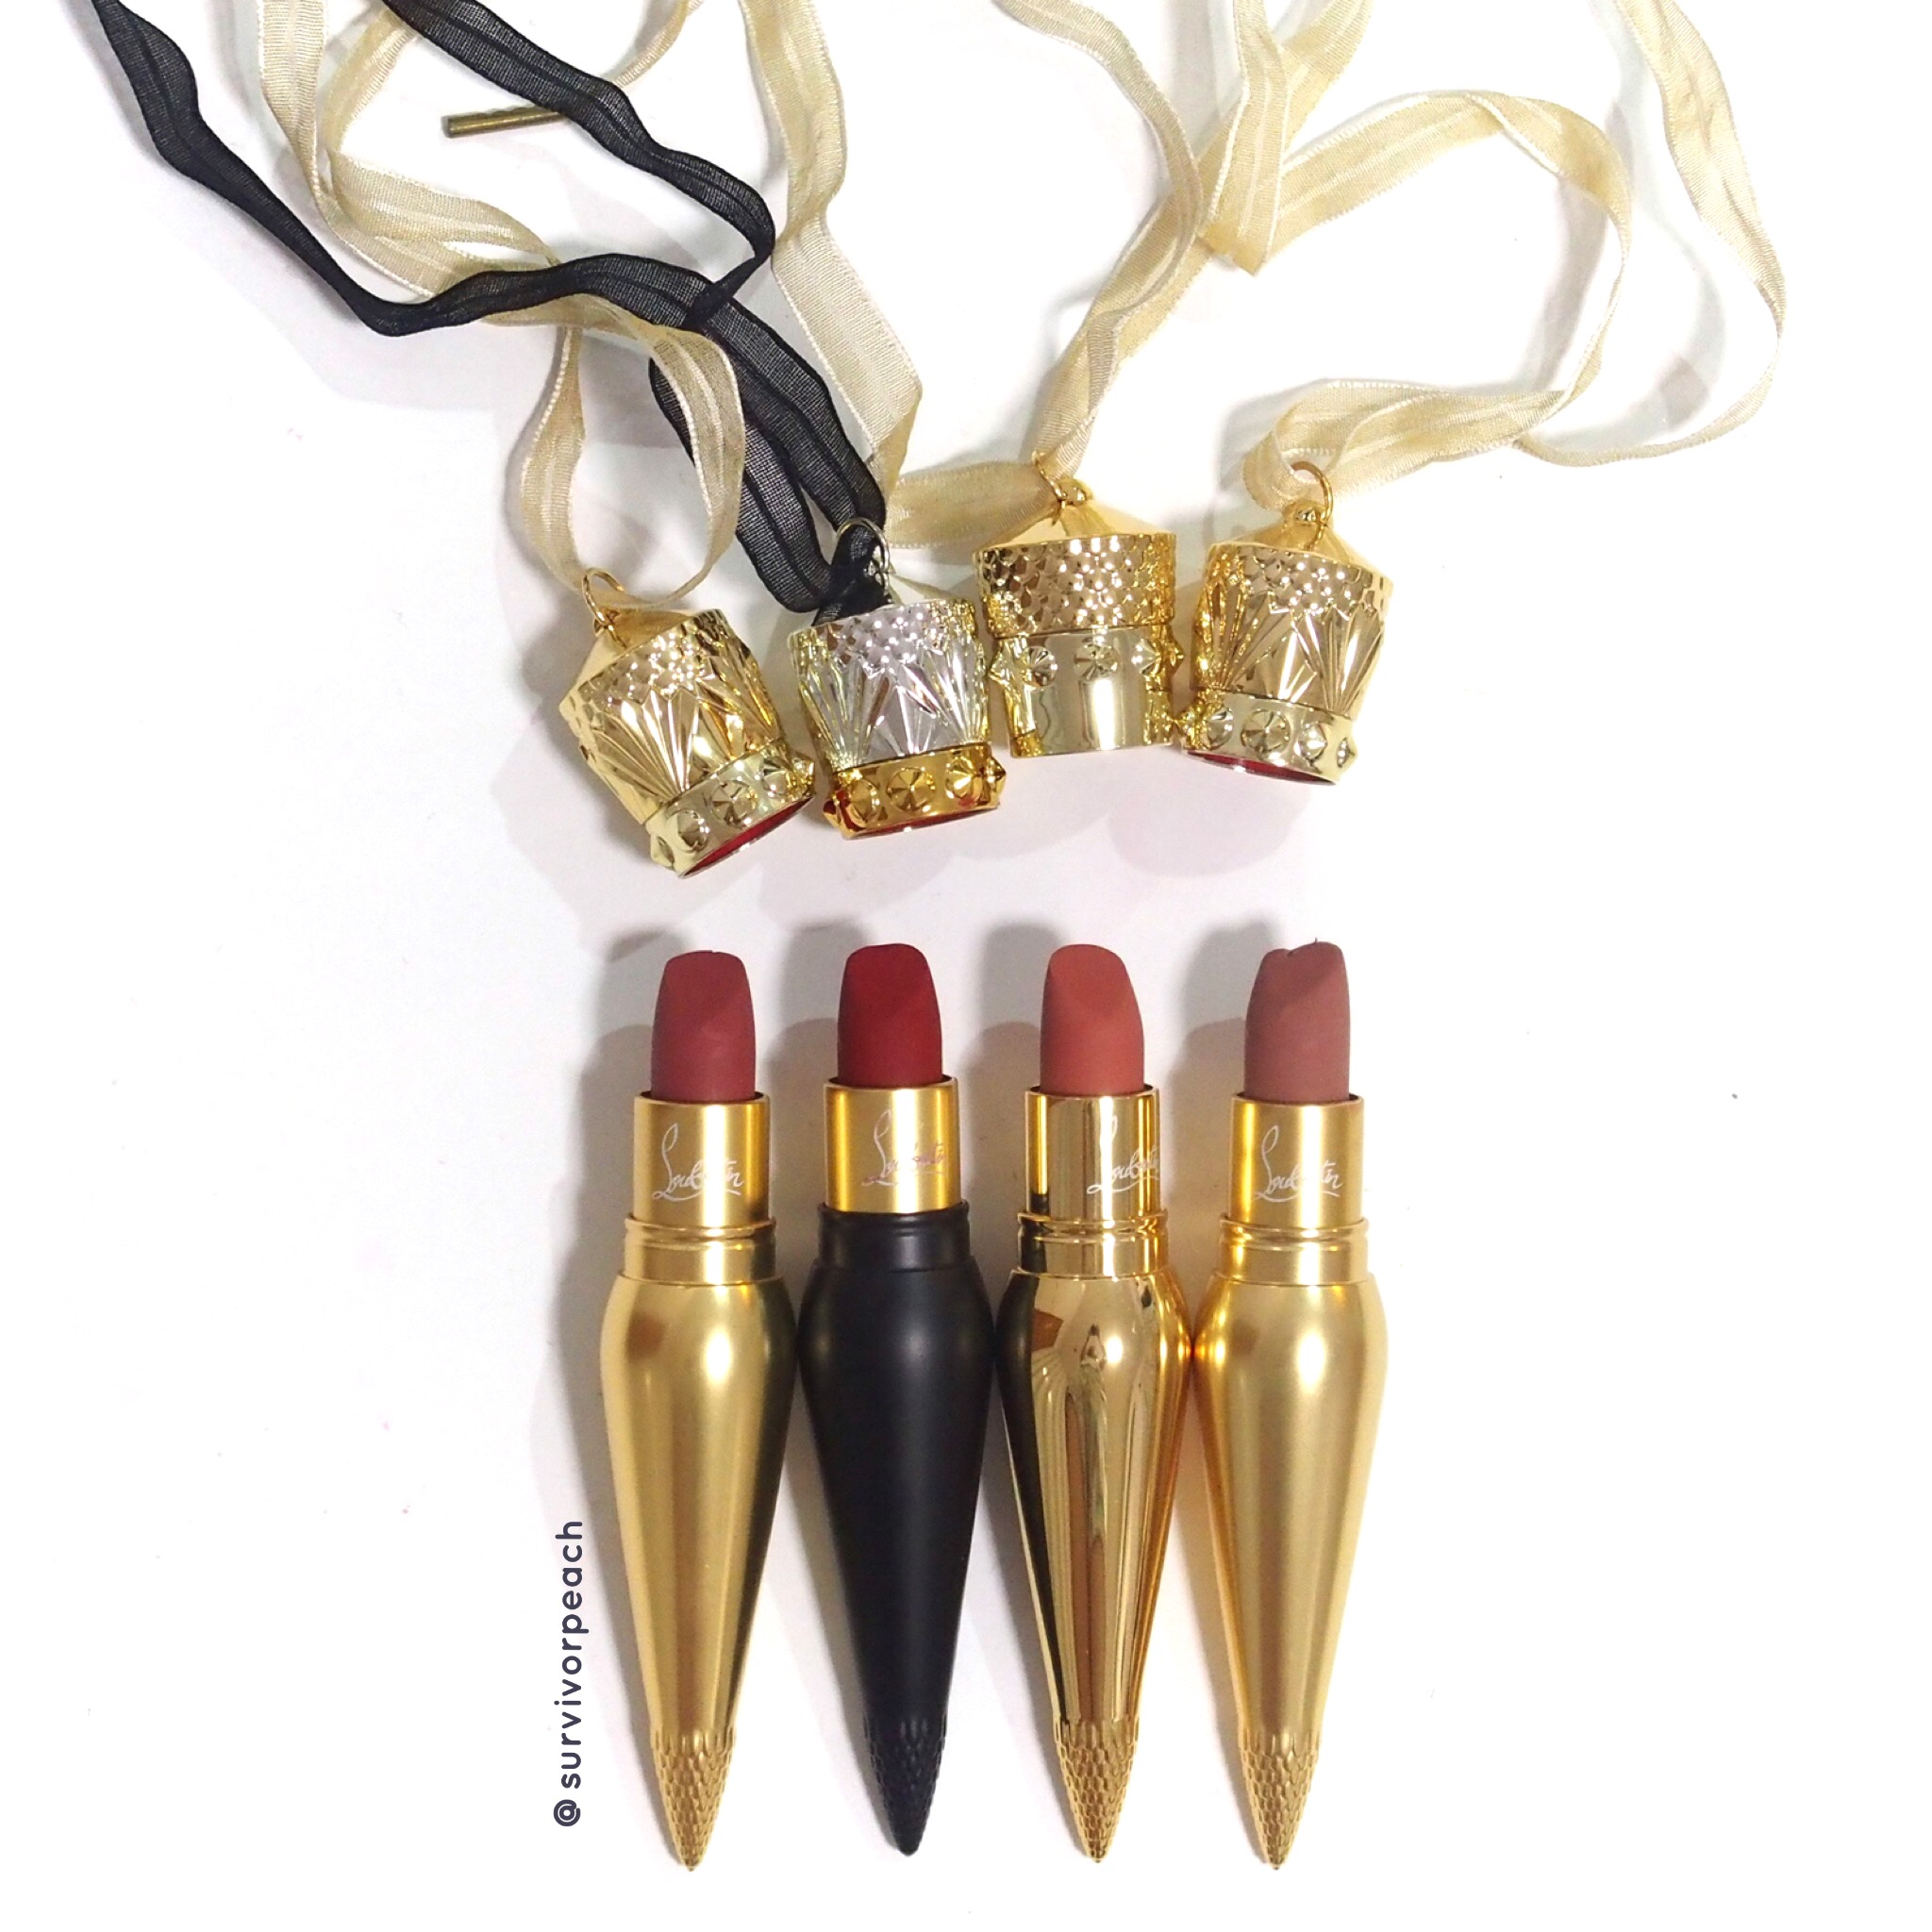 Lipsticks and Nail Polishes that can be as weapons — Survivorpeach